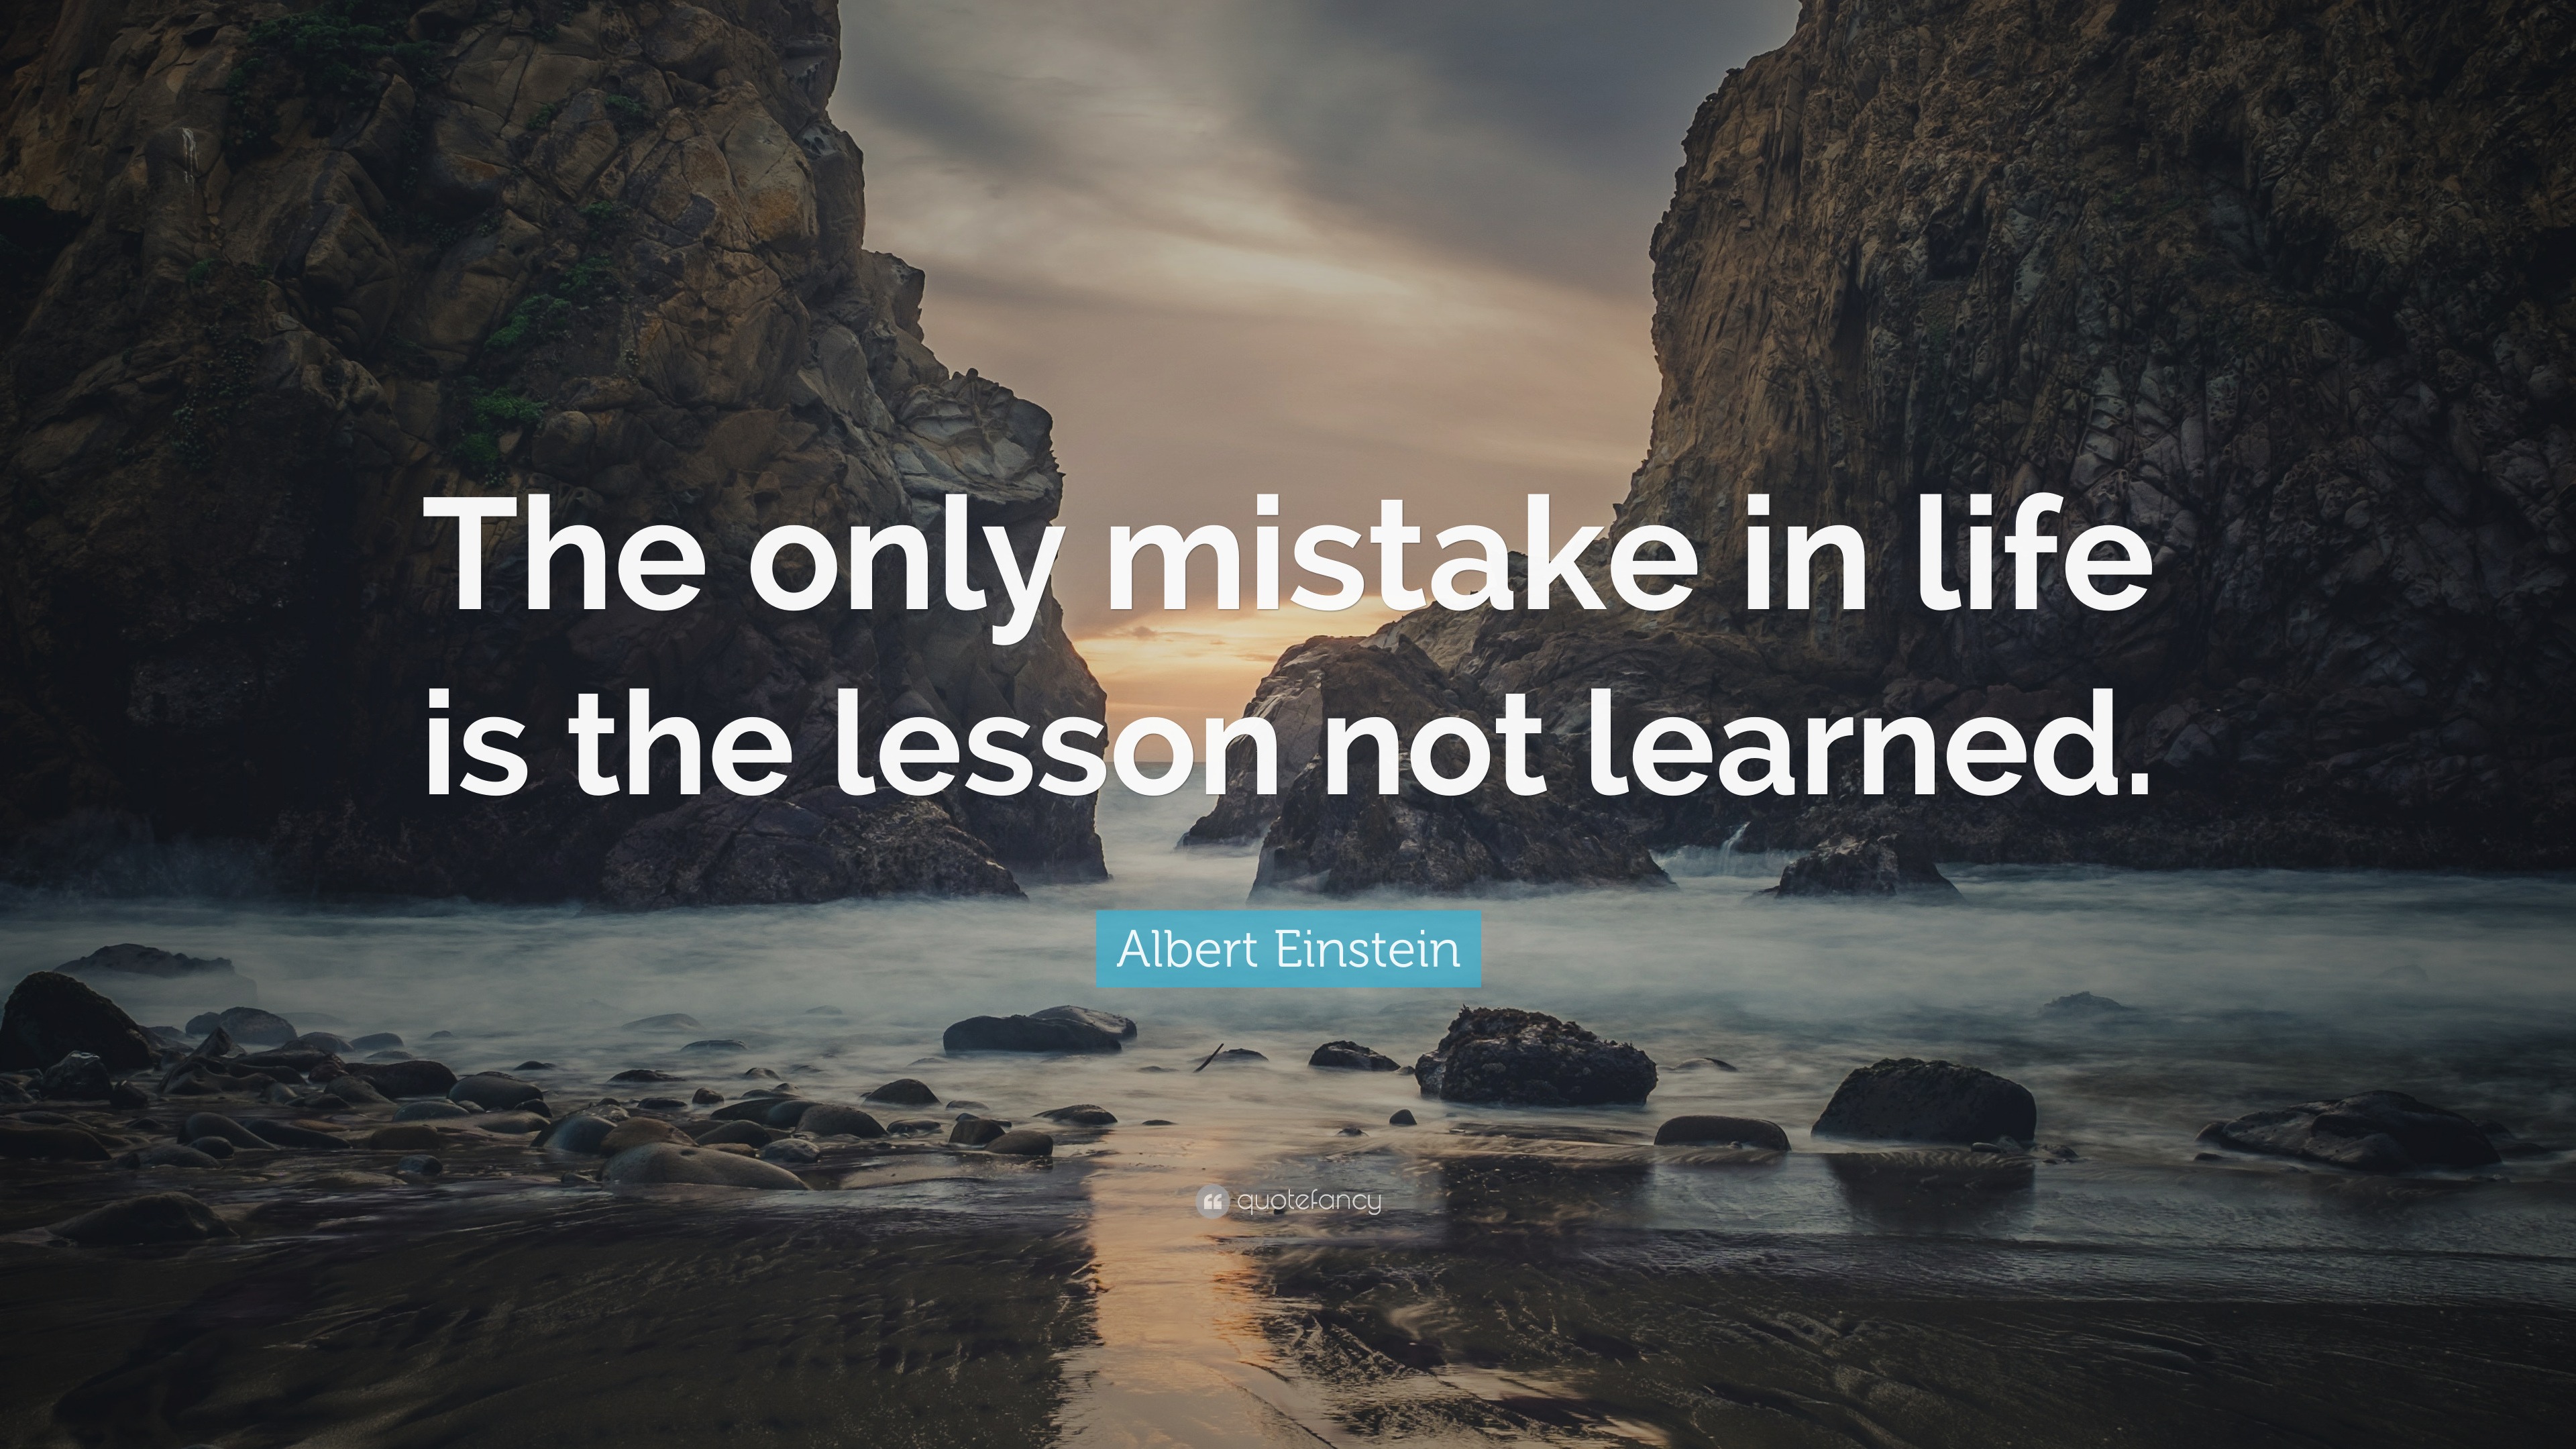 Albert Einstein Quote: “The only mistake in life is the lesson not ...